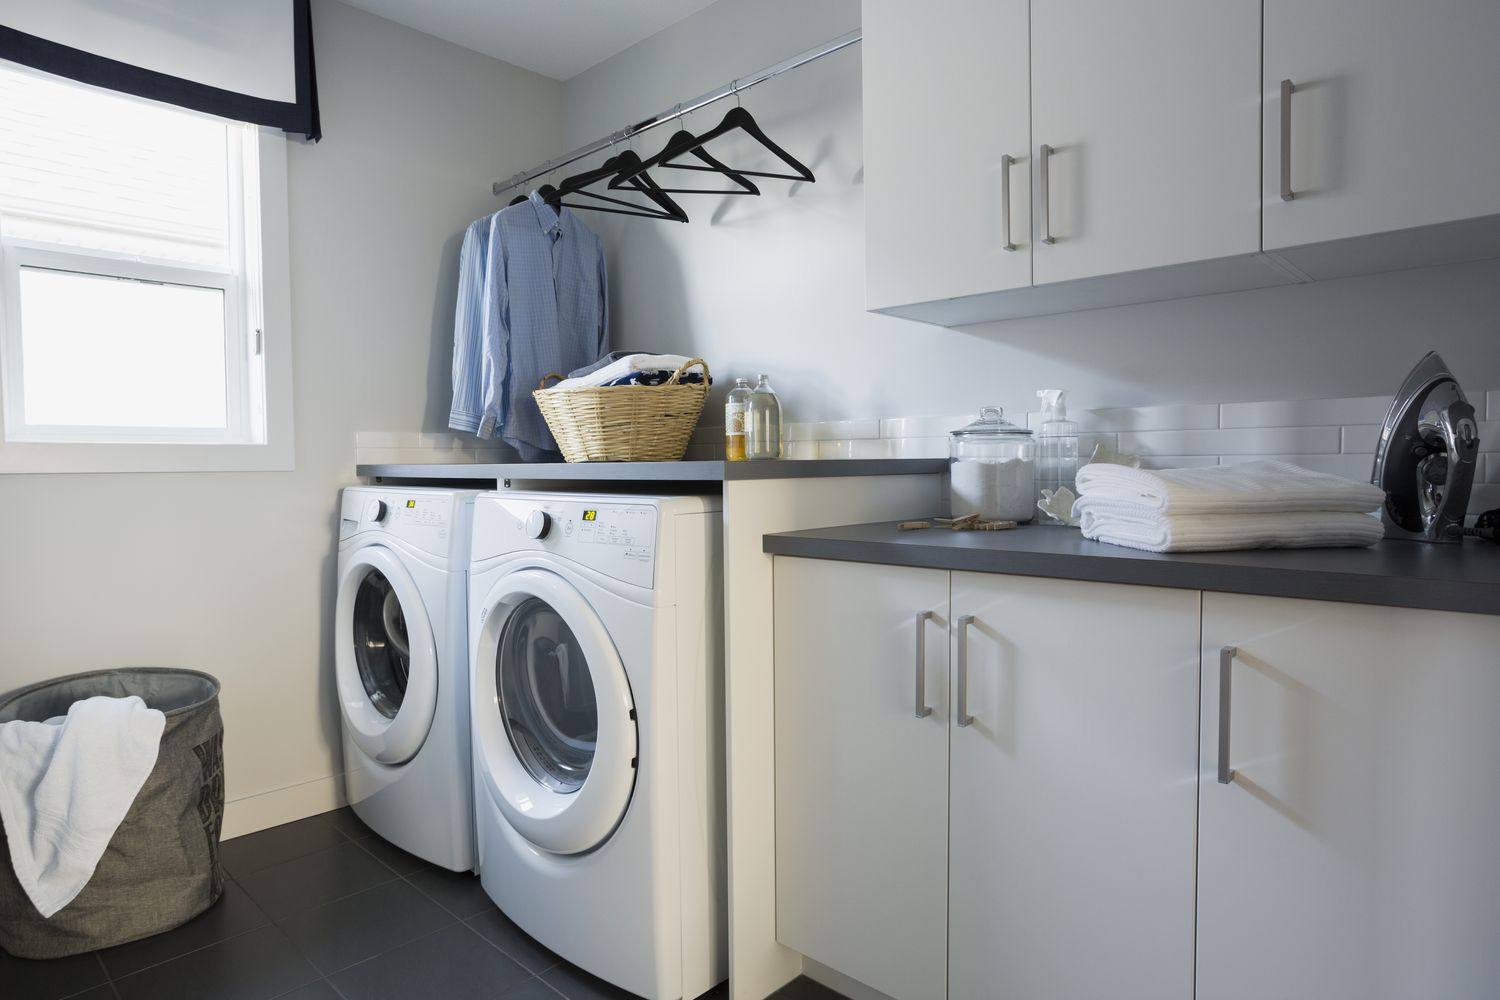 Where Should The Laundry Room Be Located